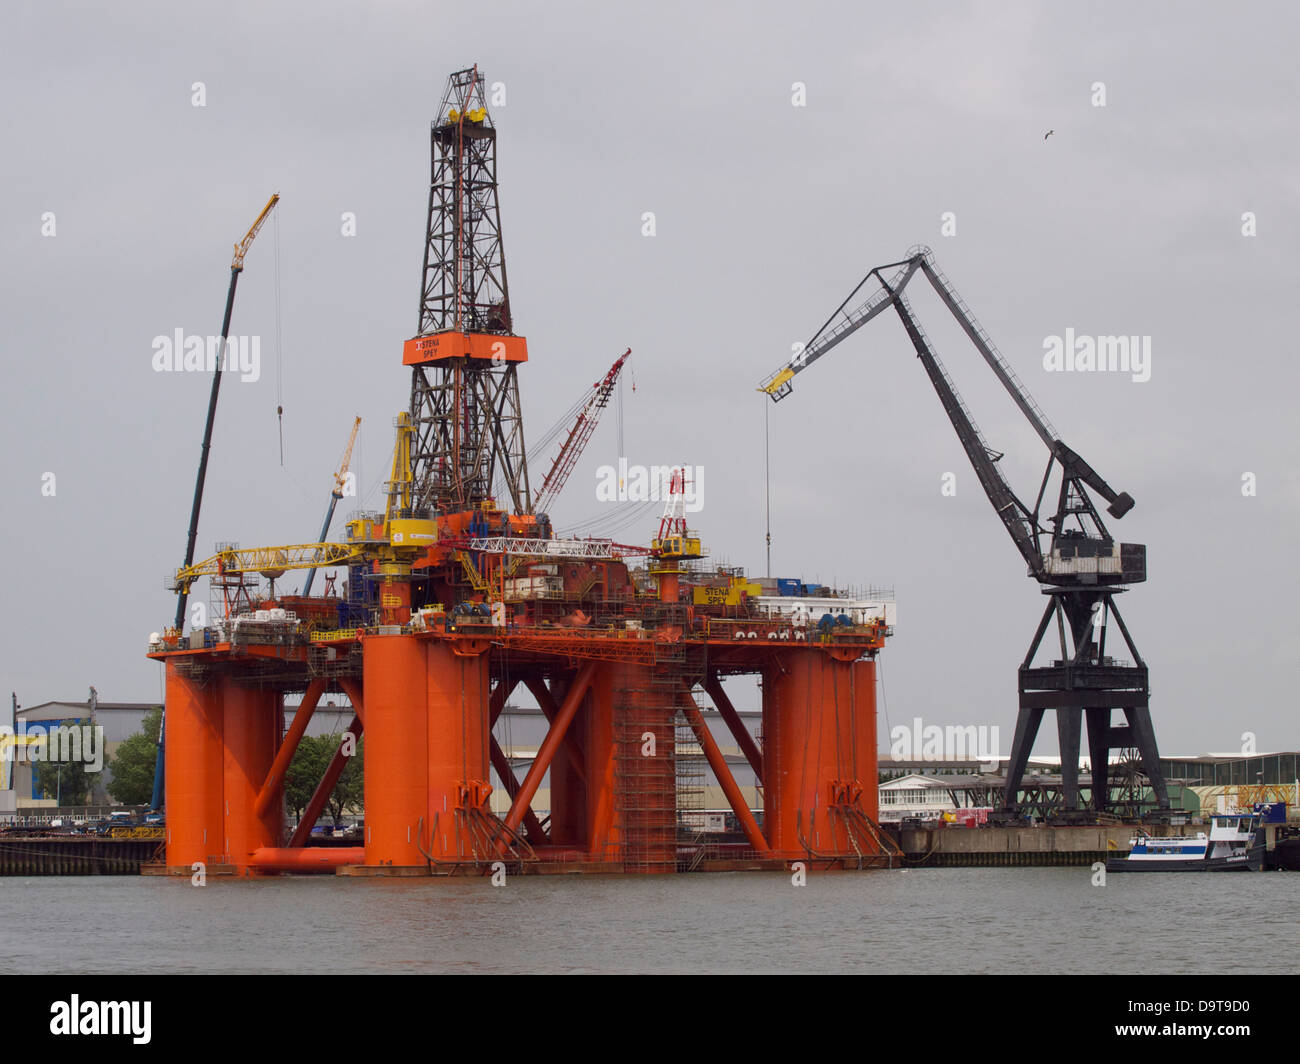 Drilling platform being constructed or repaired in the port of Rotterdam, the Netherlands Stock Photo